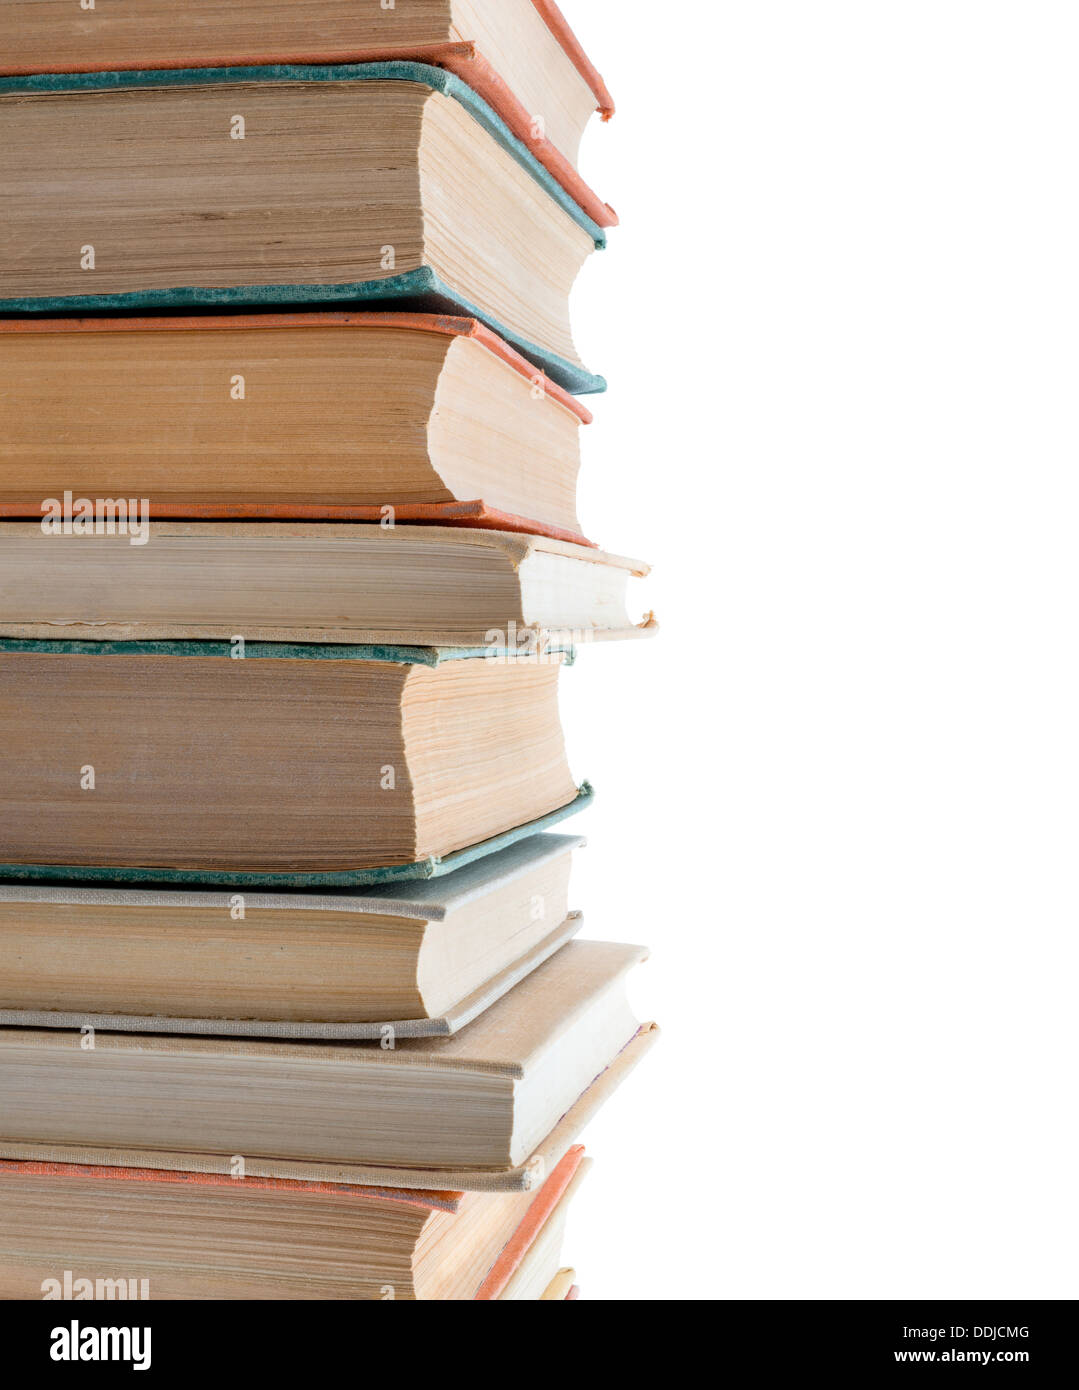 Isolated objects: old books stack on white background, close-up shot. Can be used in landscape mode too. Stock Photo